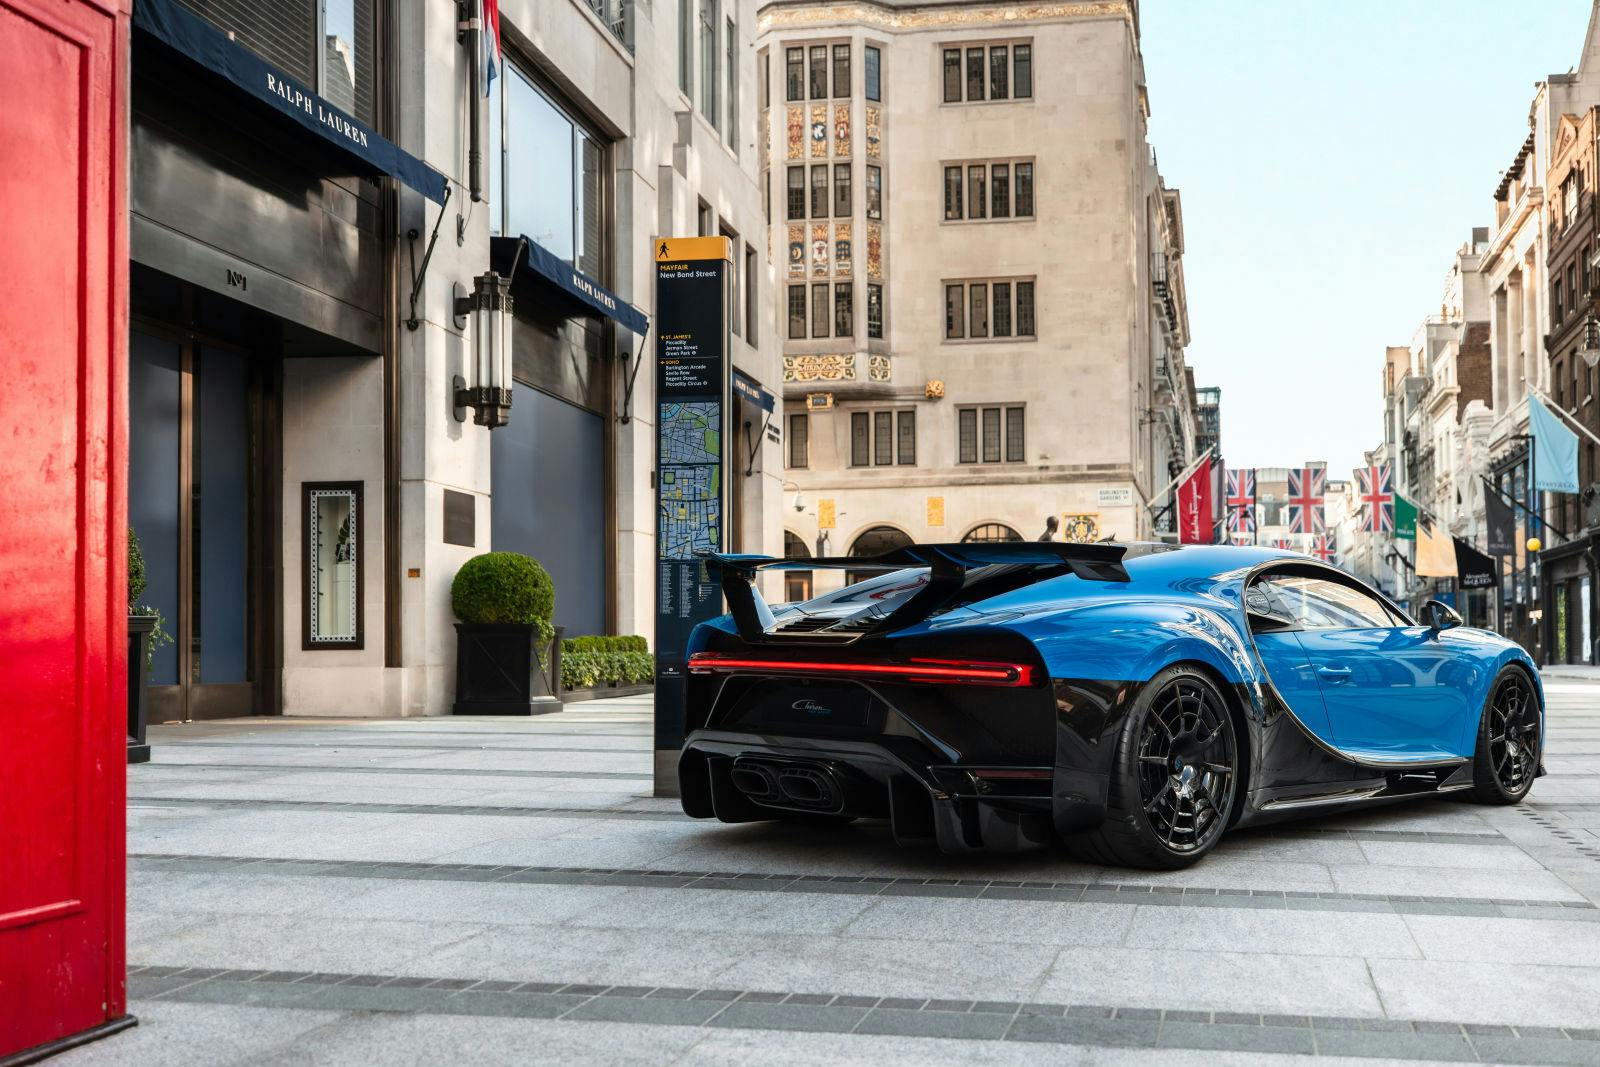 The Bugatti Chiron Pur Sport in London’s exclusive Mayfair district.